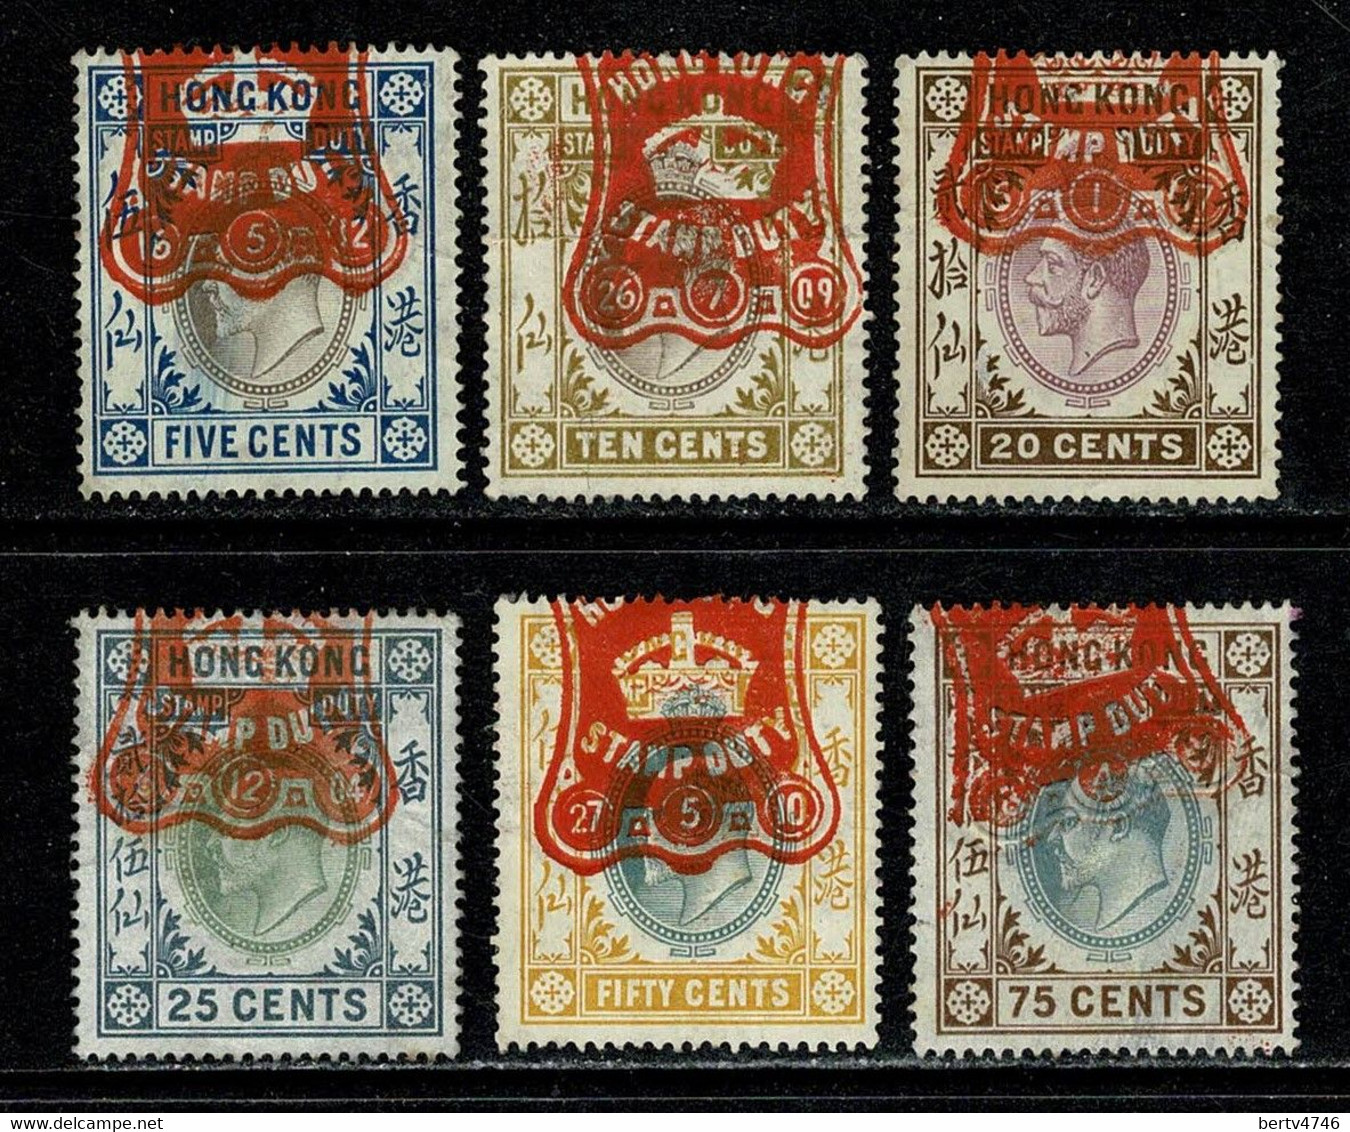 Hong Kong Stamp Duty Used Edward VII 5, 10, 20, 25, 50, 75 Cents - Postal Fiscal Stamps